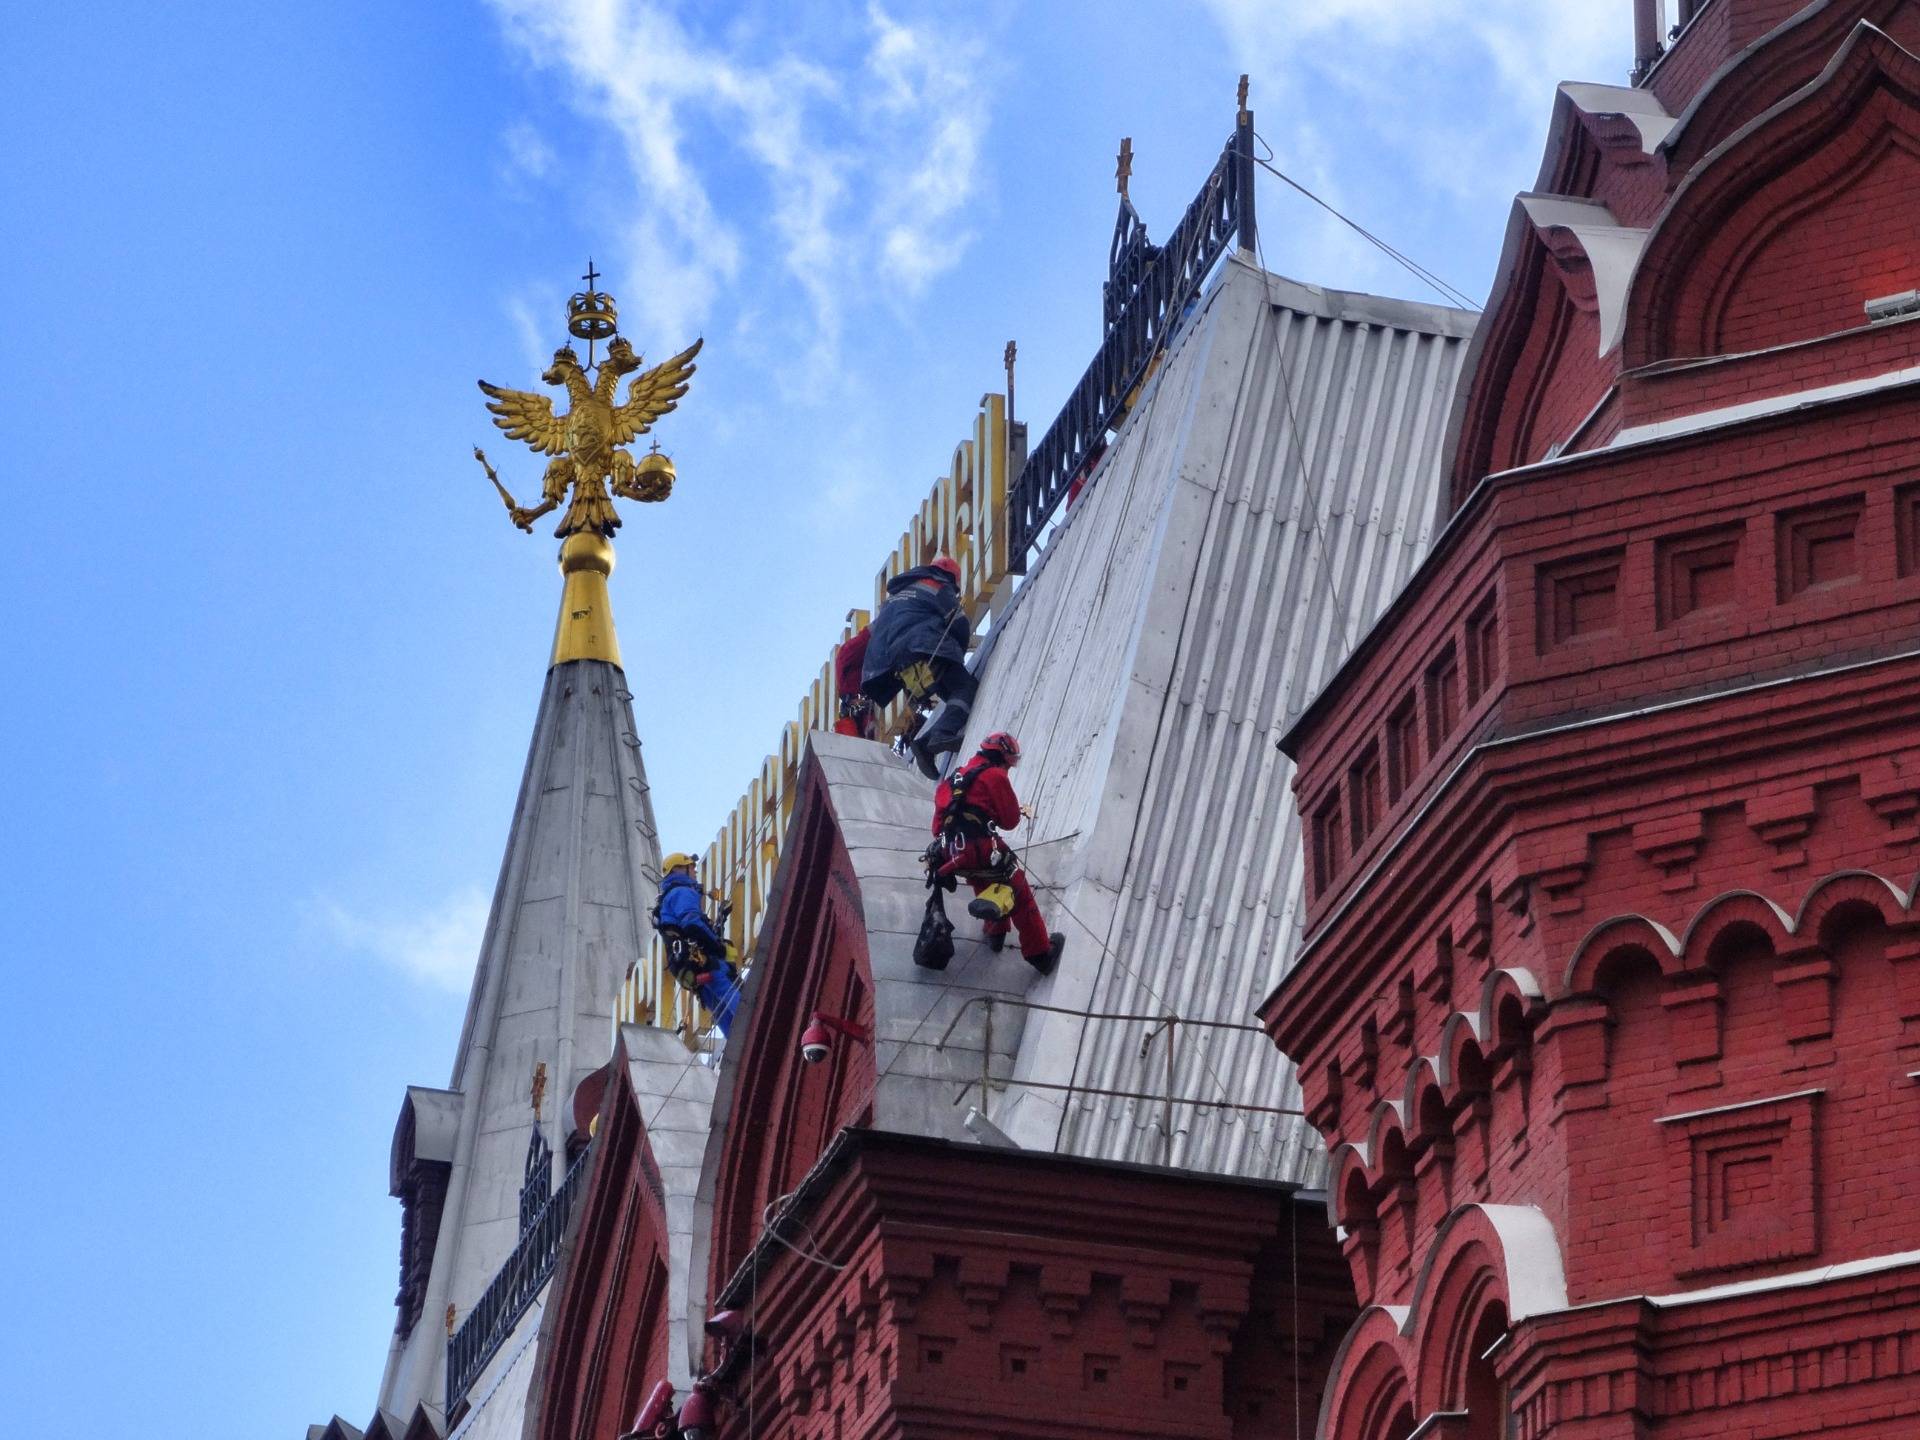 Climbers on a roof near the Red Square